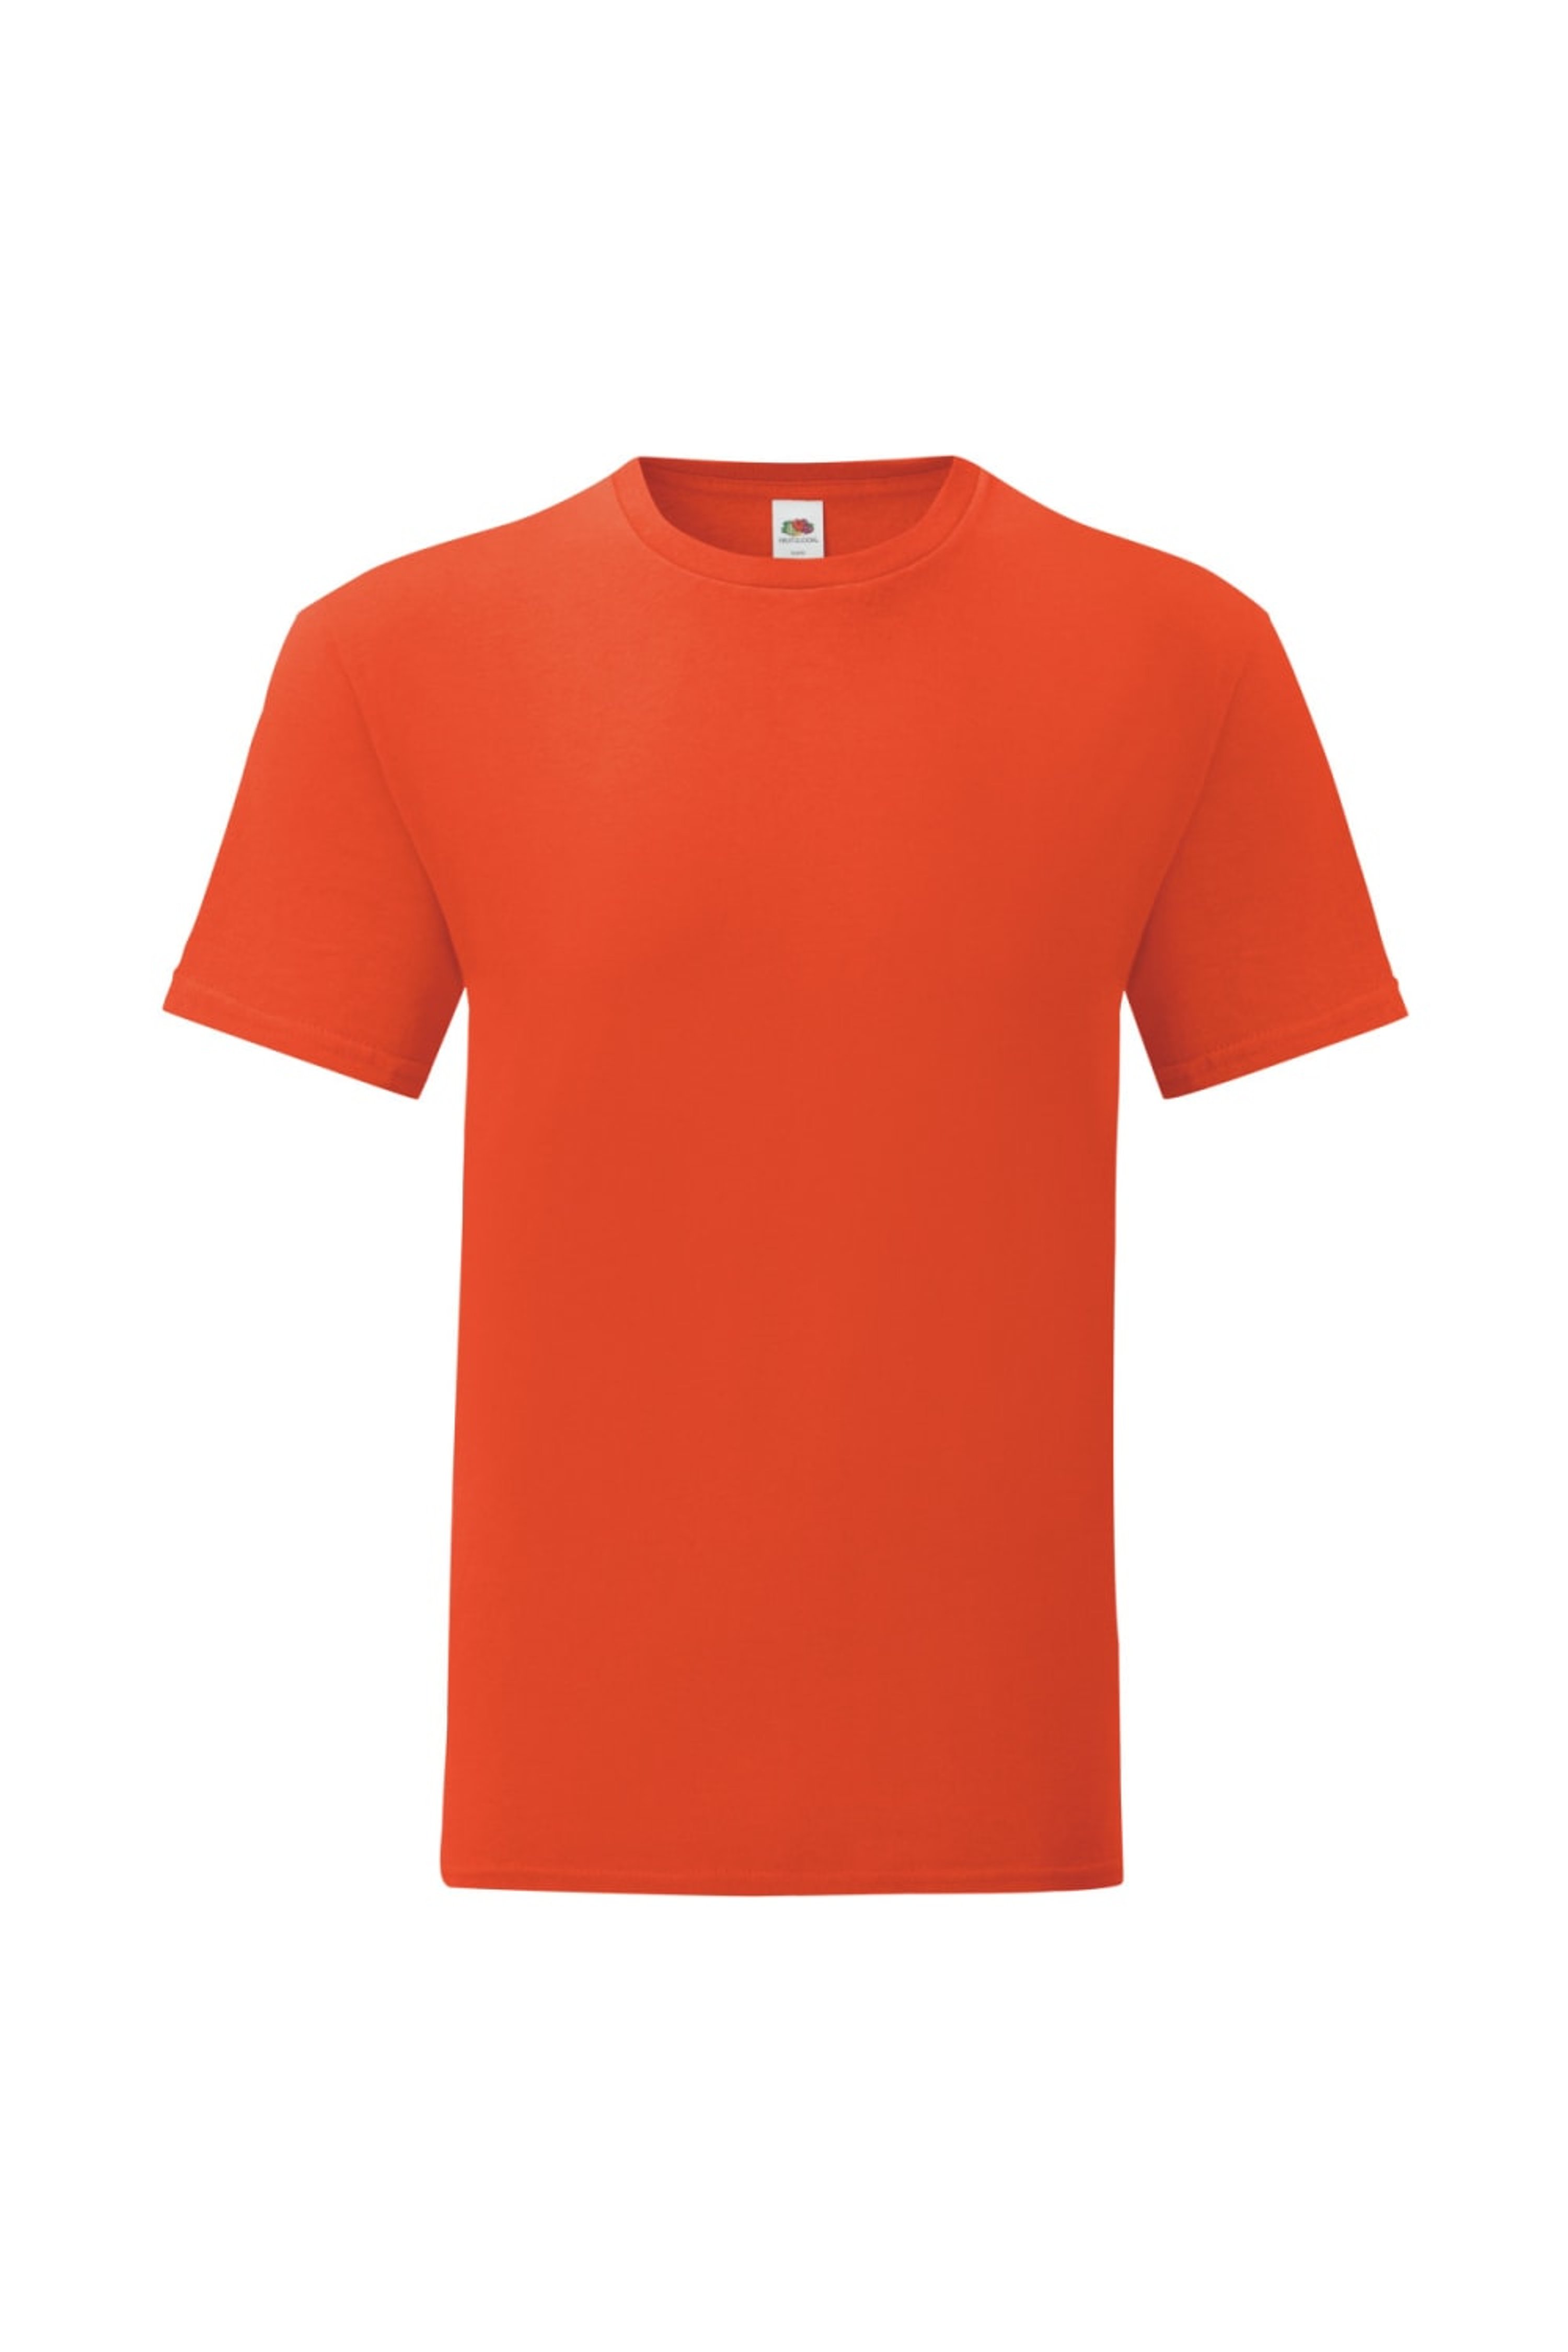 FRUIT OF THE LOOM FRUIT OF THE LOOM FRUIT OF THE LOOM MENS ICONIC T-SHIRT (PACK OF 5) (FLAME ORANGE)